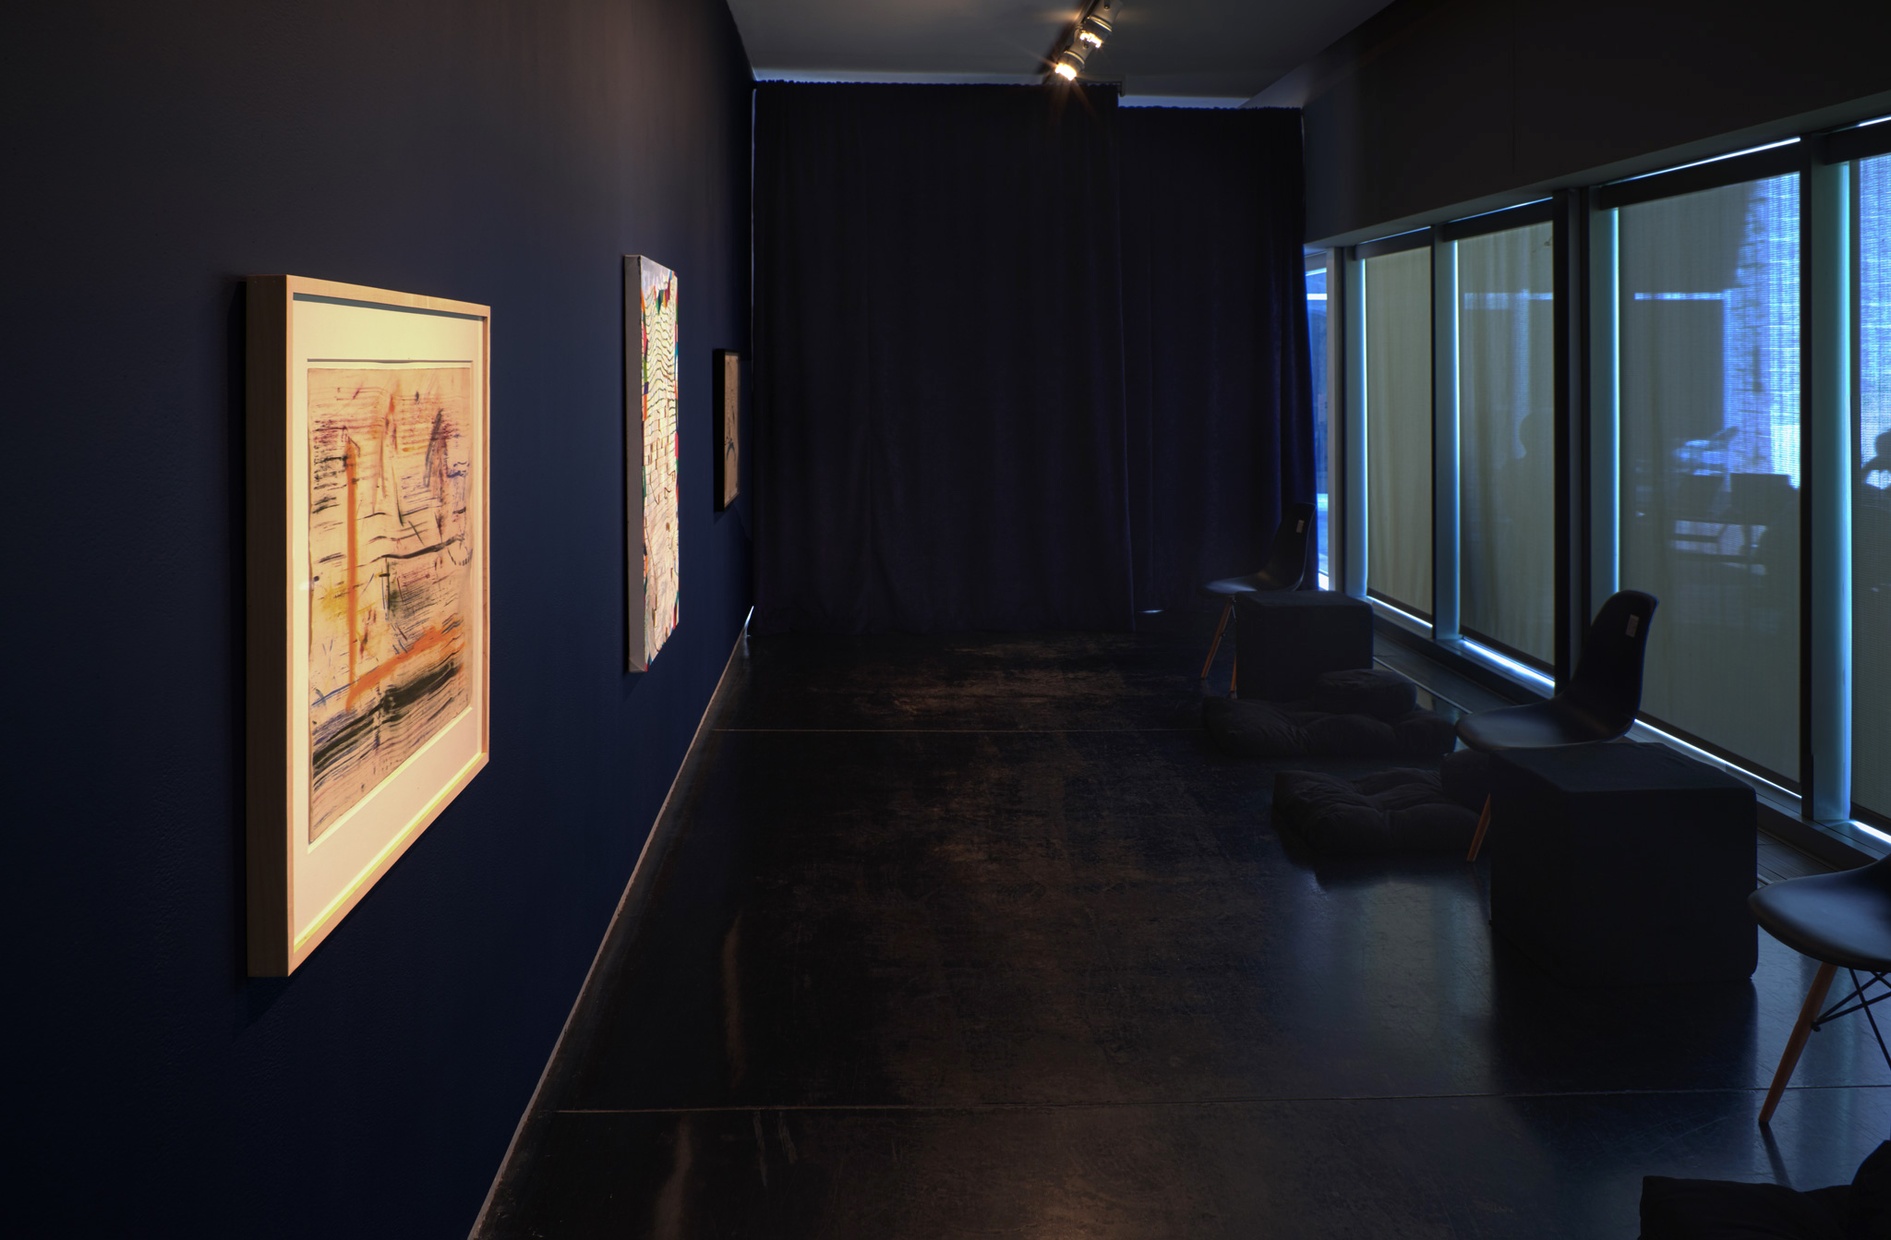 In a dark room with blinds covering the windows are multiple black chairs facing three abstract artworks against a blue wall.